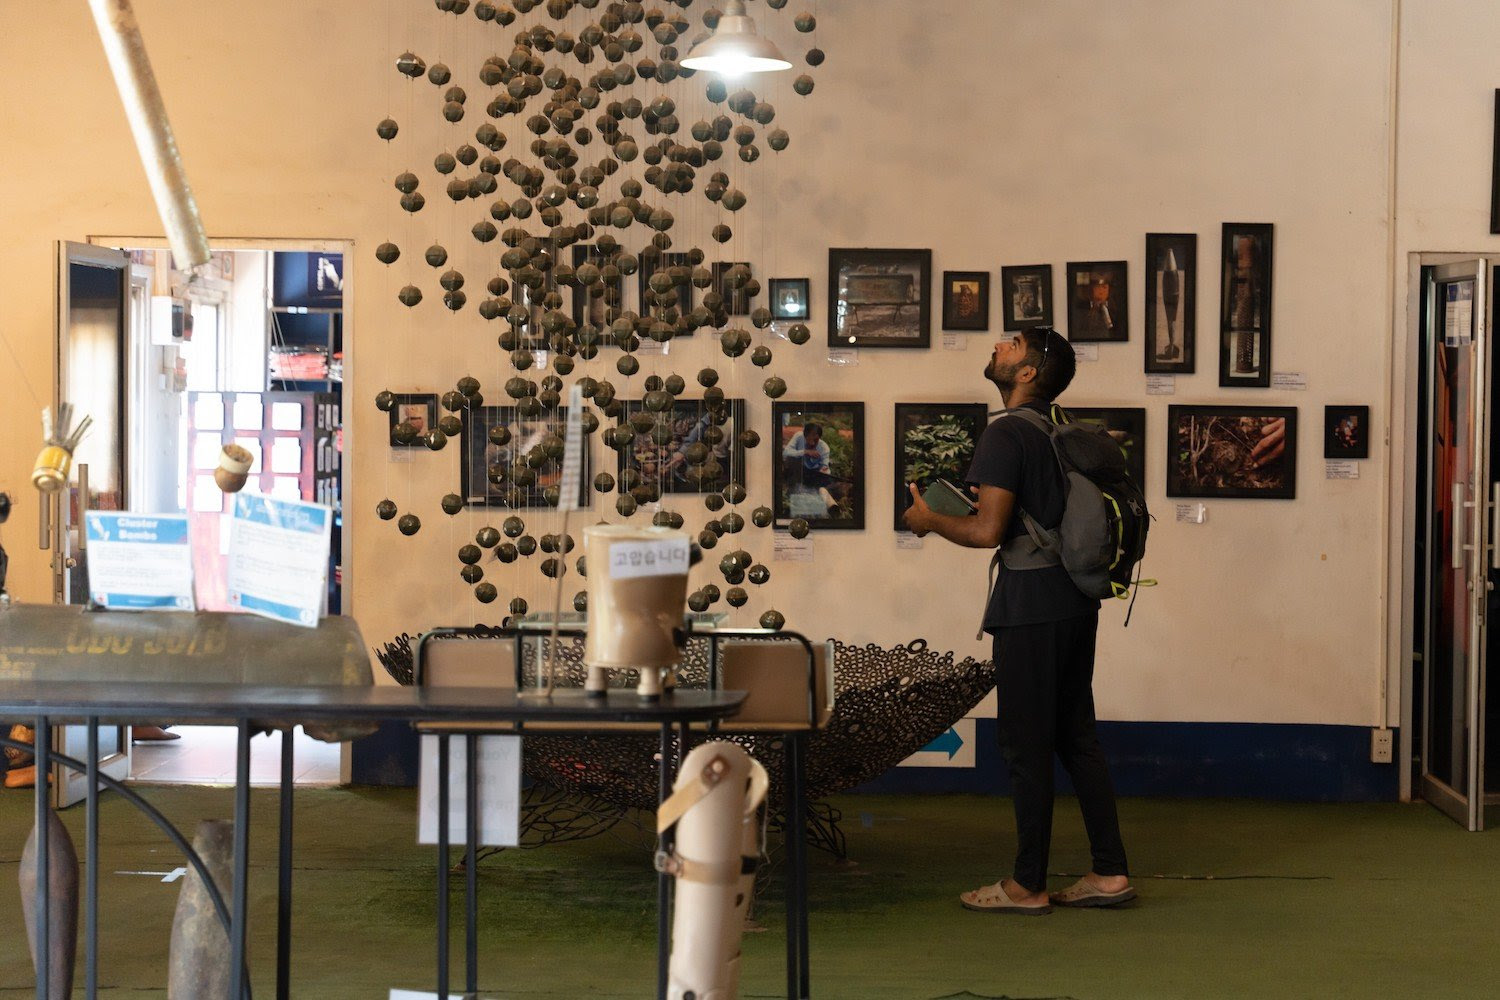 A visitor views an exhibit of cluster bomb remnants at the Cooperative Orthotic and Prosthetic Enterprise Visitor Center in Vientiane, Laos, on July 11.